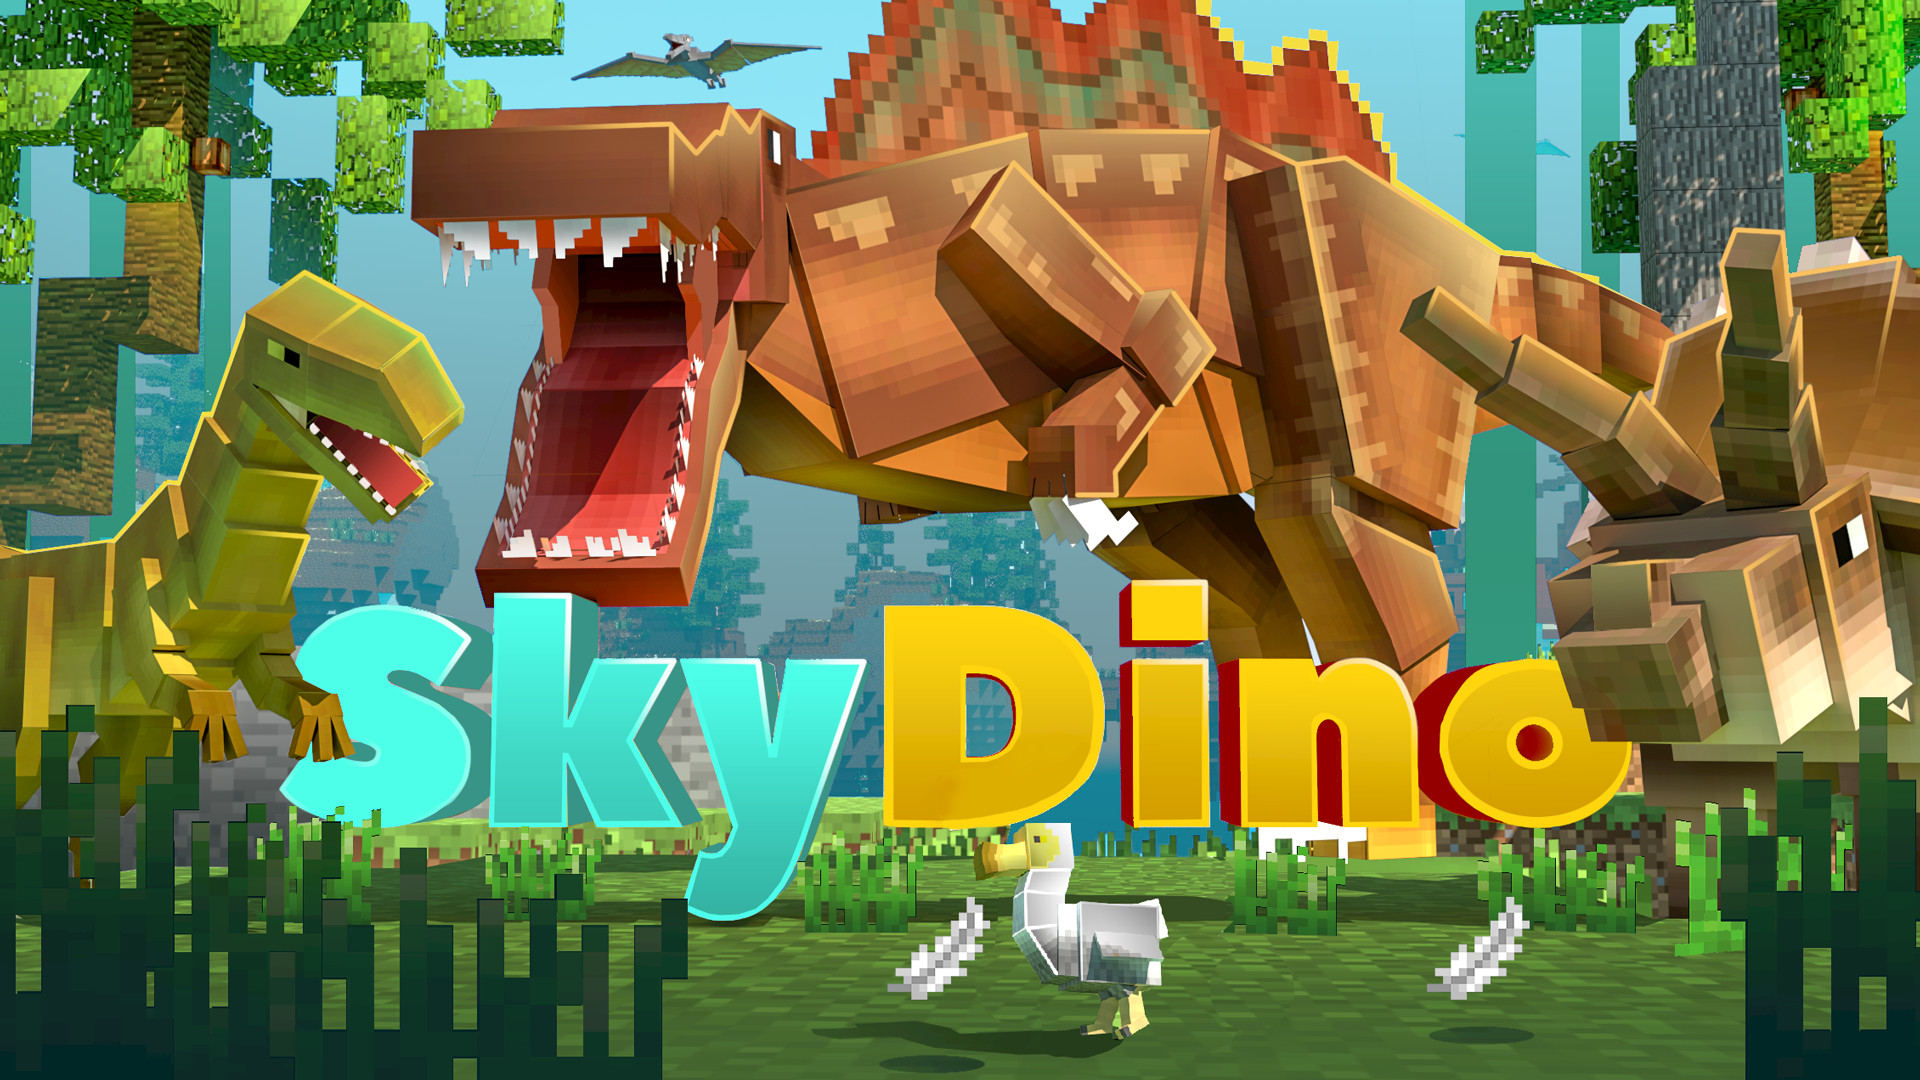 Cover art for the skydino map, depicting a dinosaur.